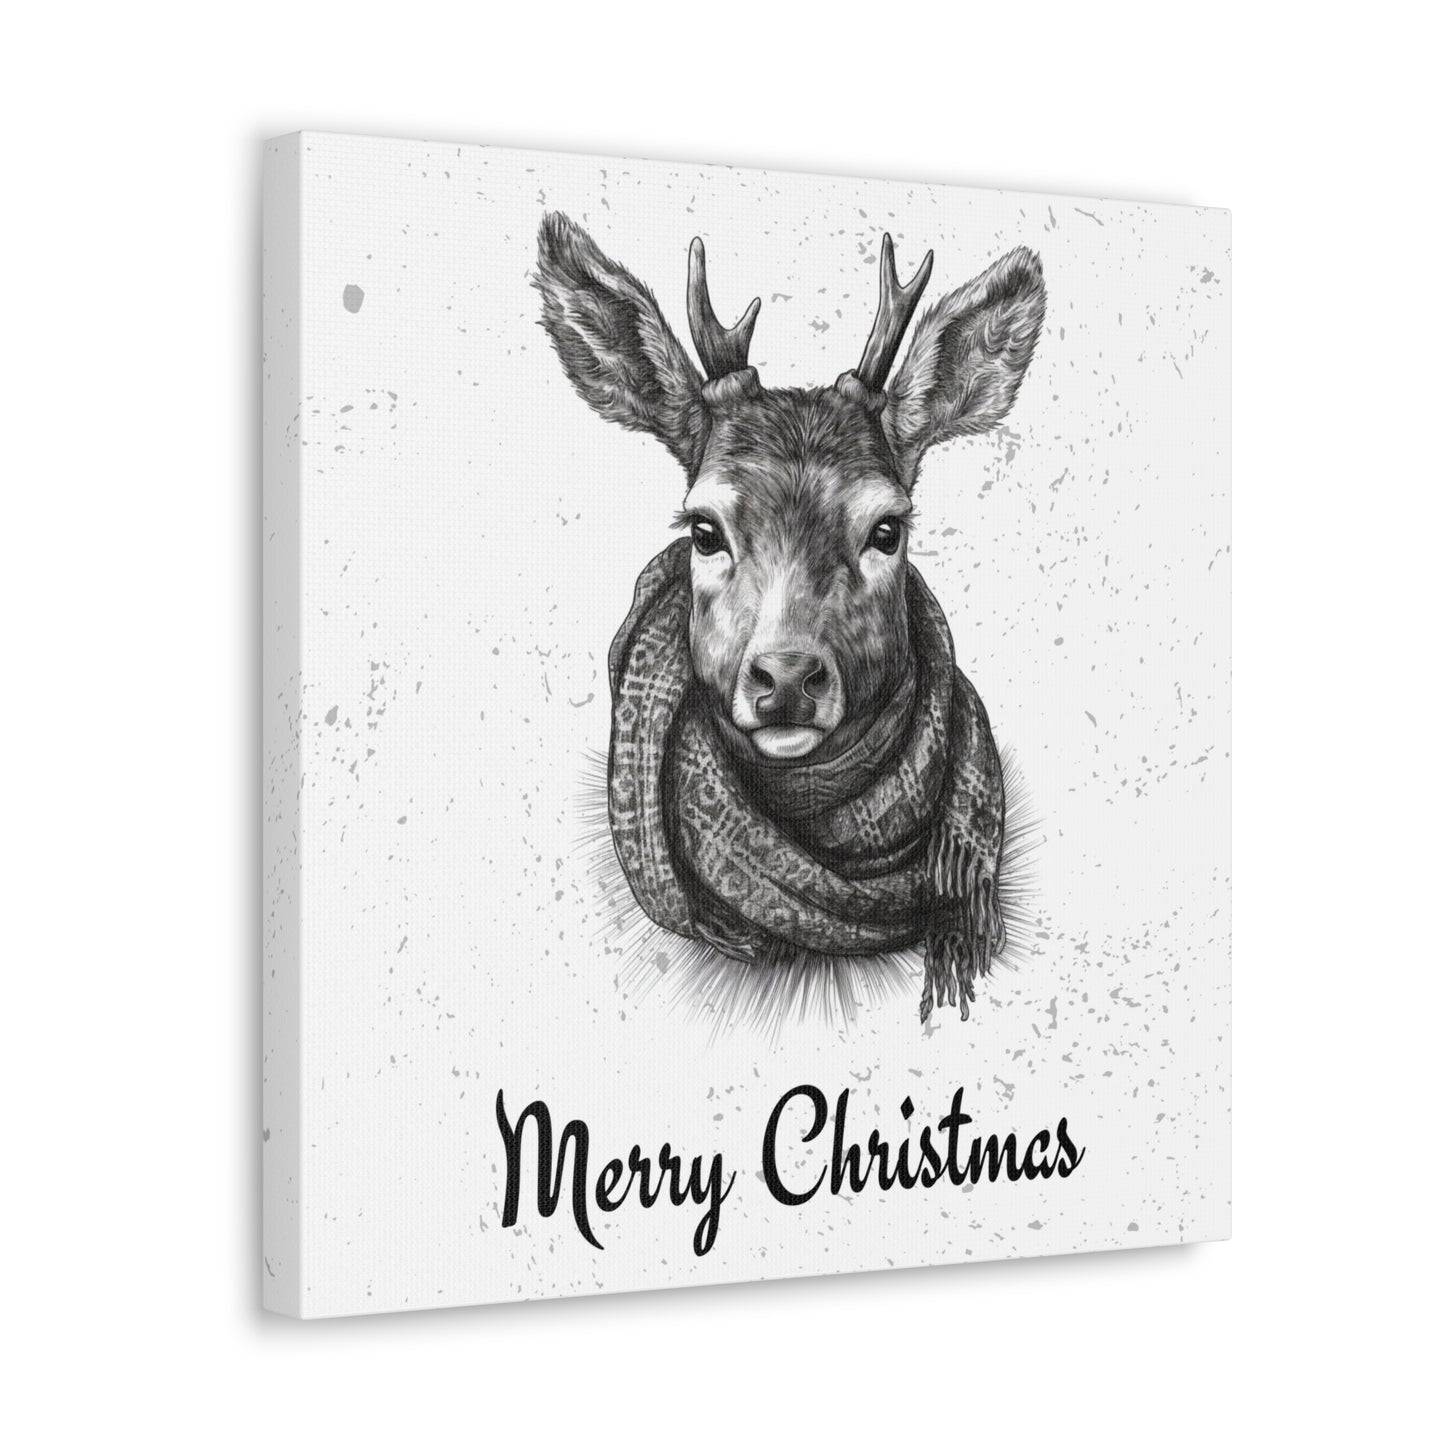 "Merry Christmas" Wall Art - Weave Got Gifts - Unique Gifts You Won’t Find Anywhere Else!